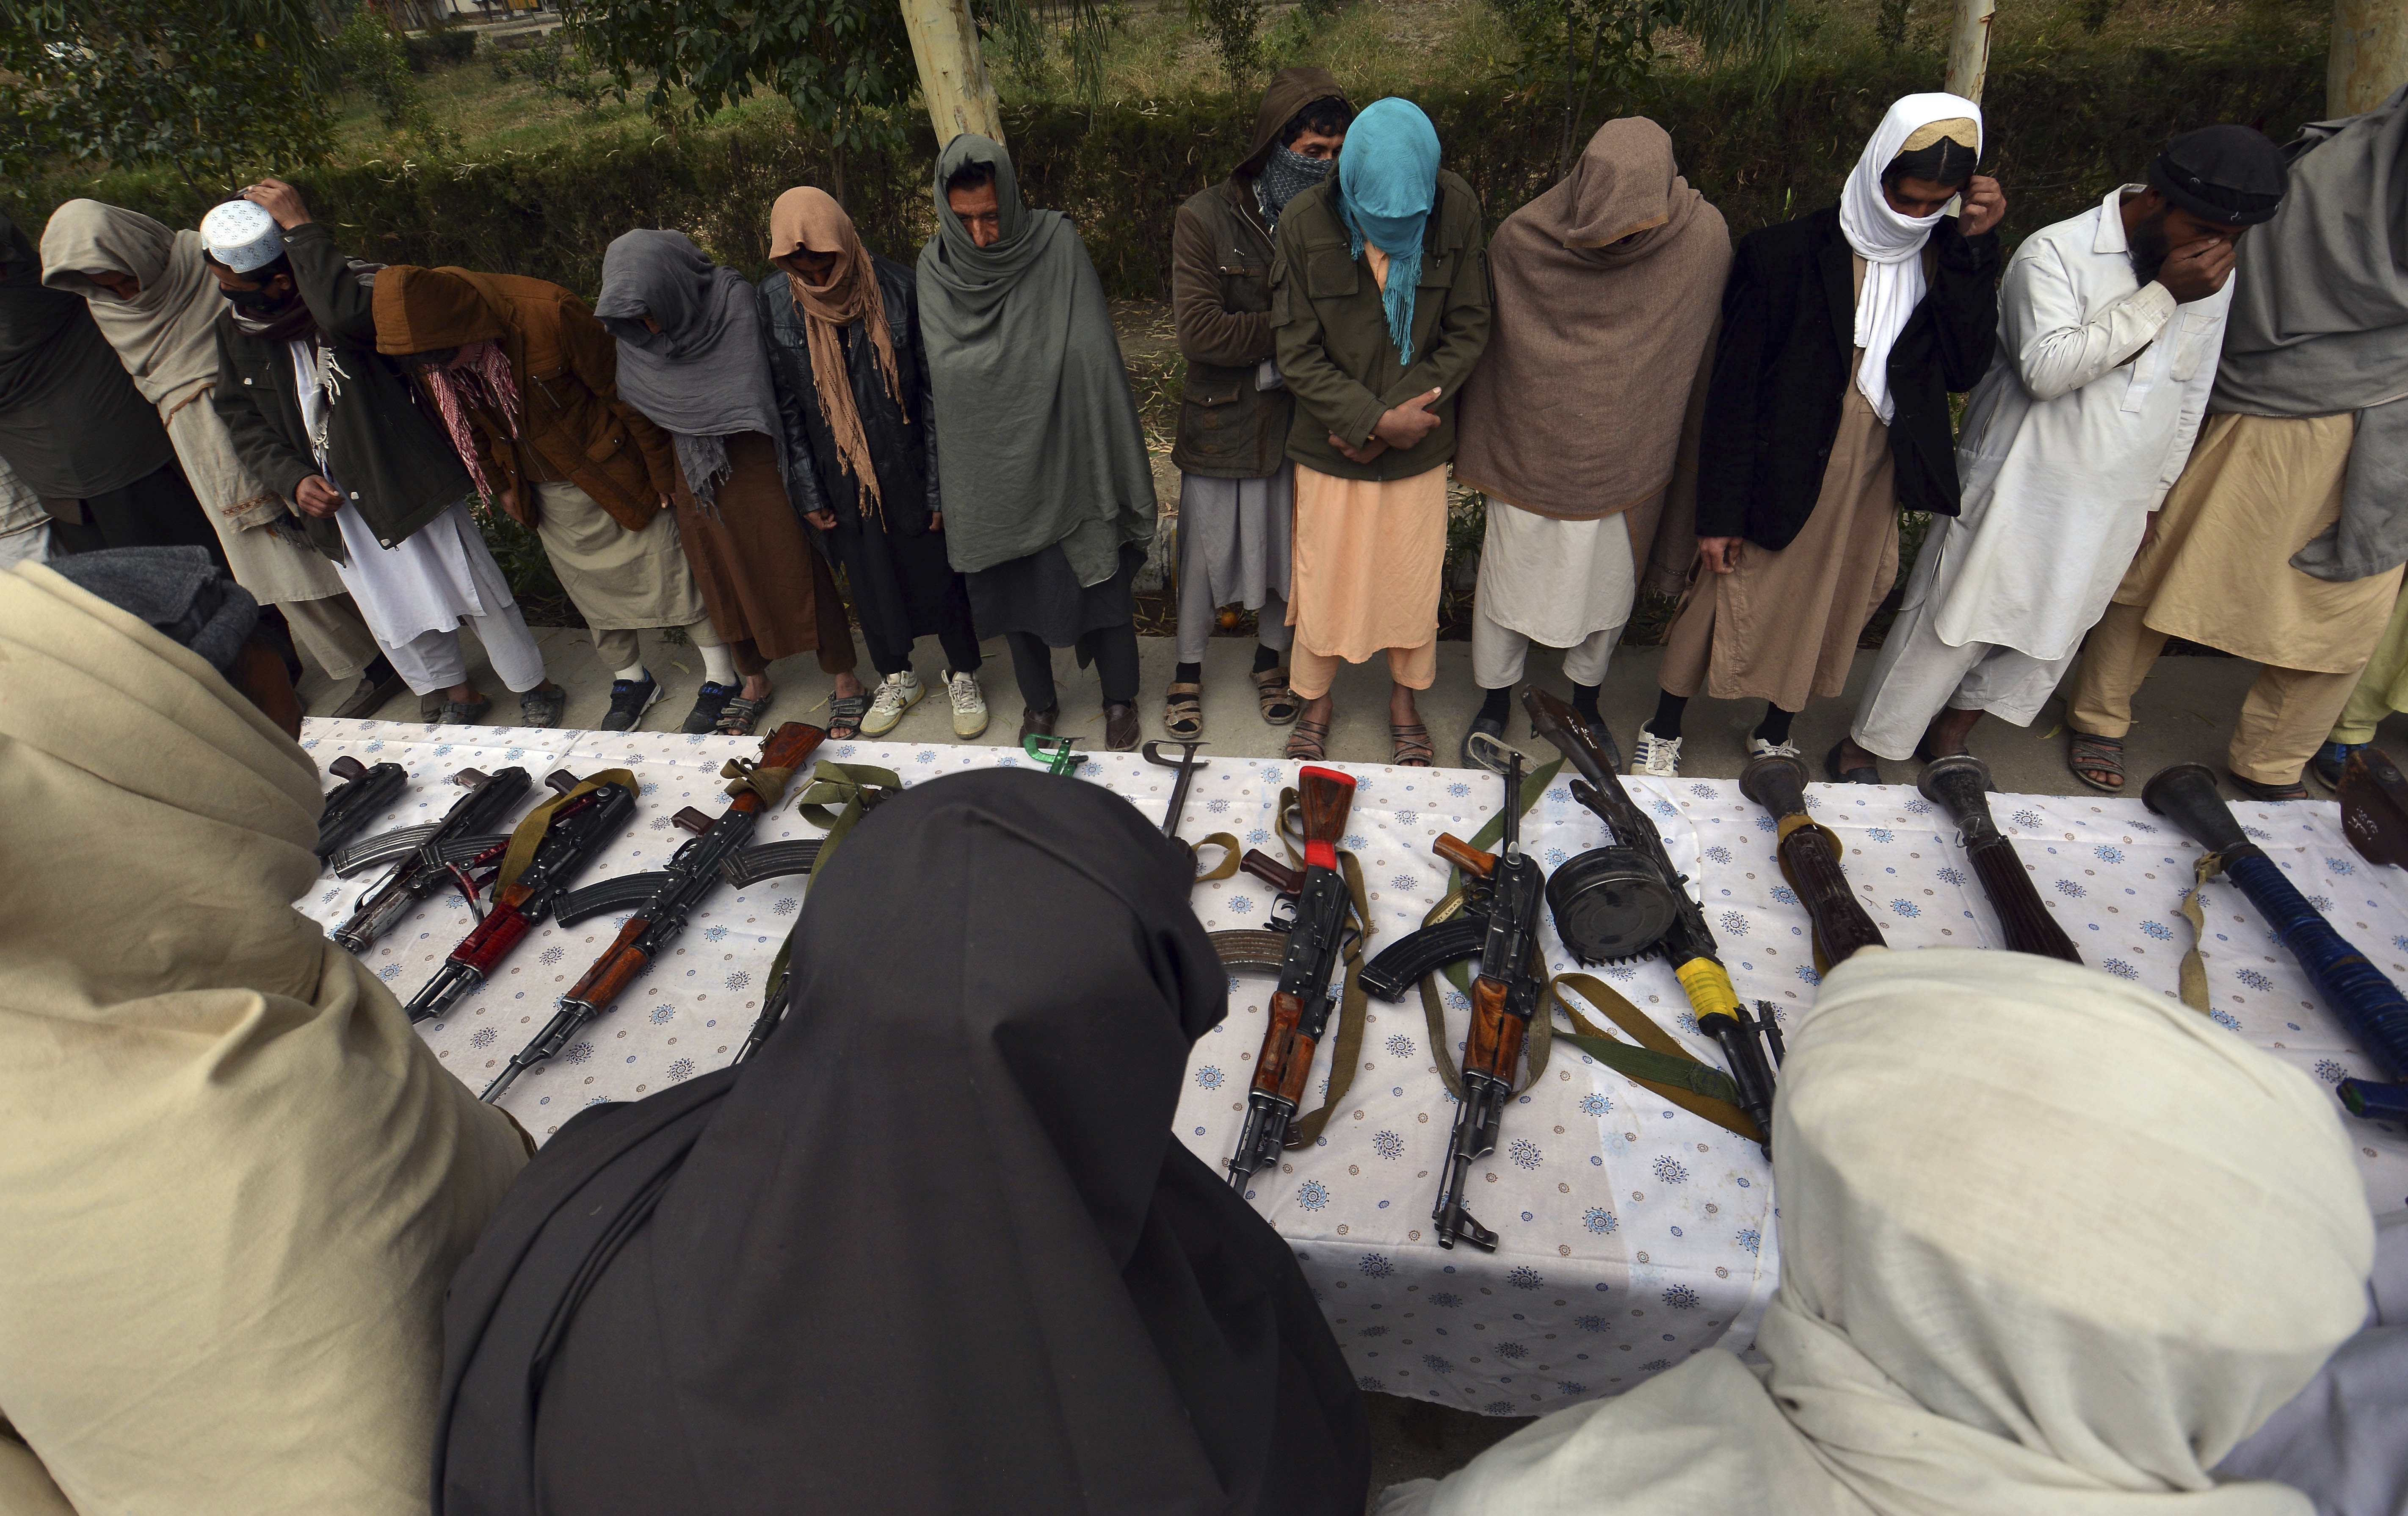 Former Taliban militants stand near their weapons at a ceremony with the Afghan government in Jalalabad, Afghanistan, on November 22, 2018. About 54 former militants from Jalalabad province handed over their weapons as part of of a peace-reconciliation program